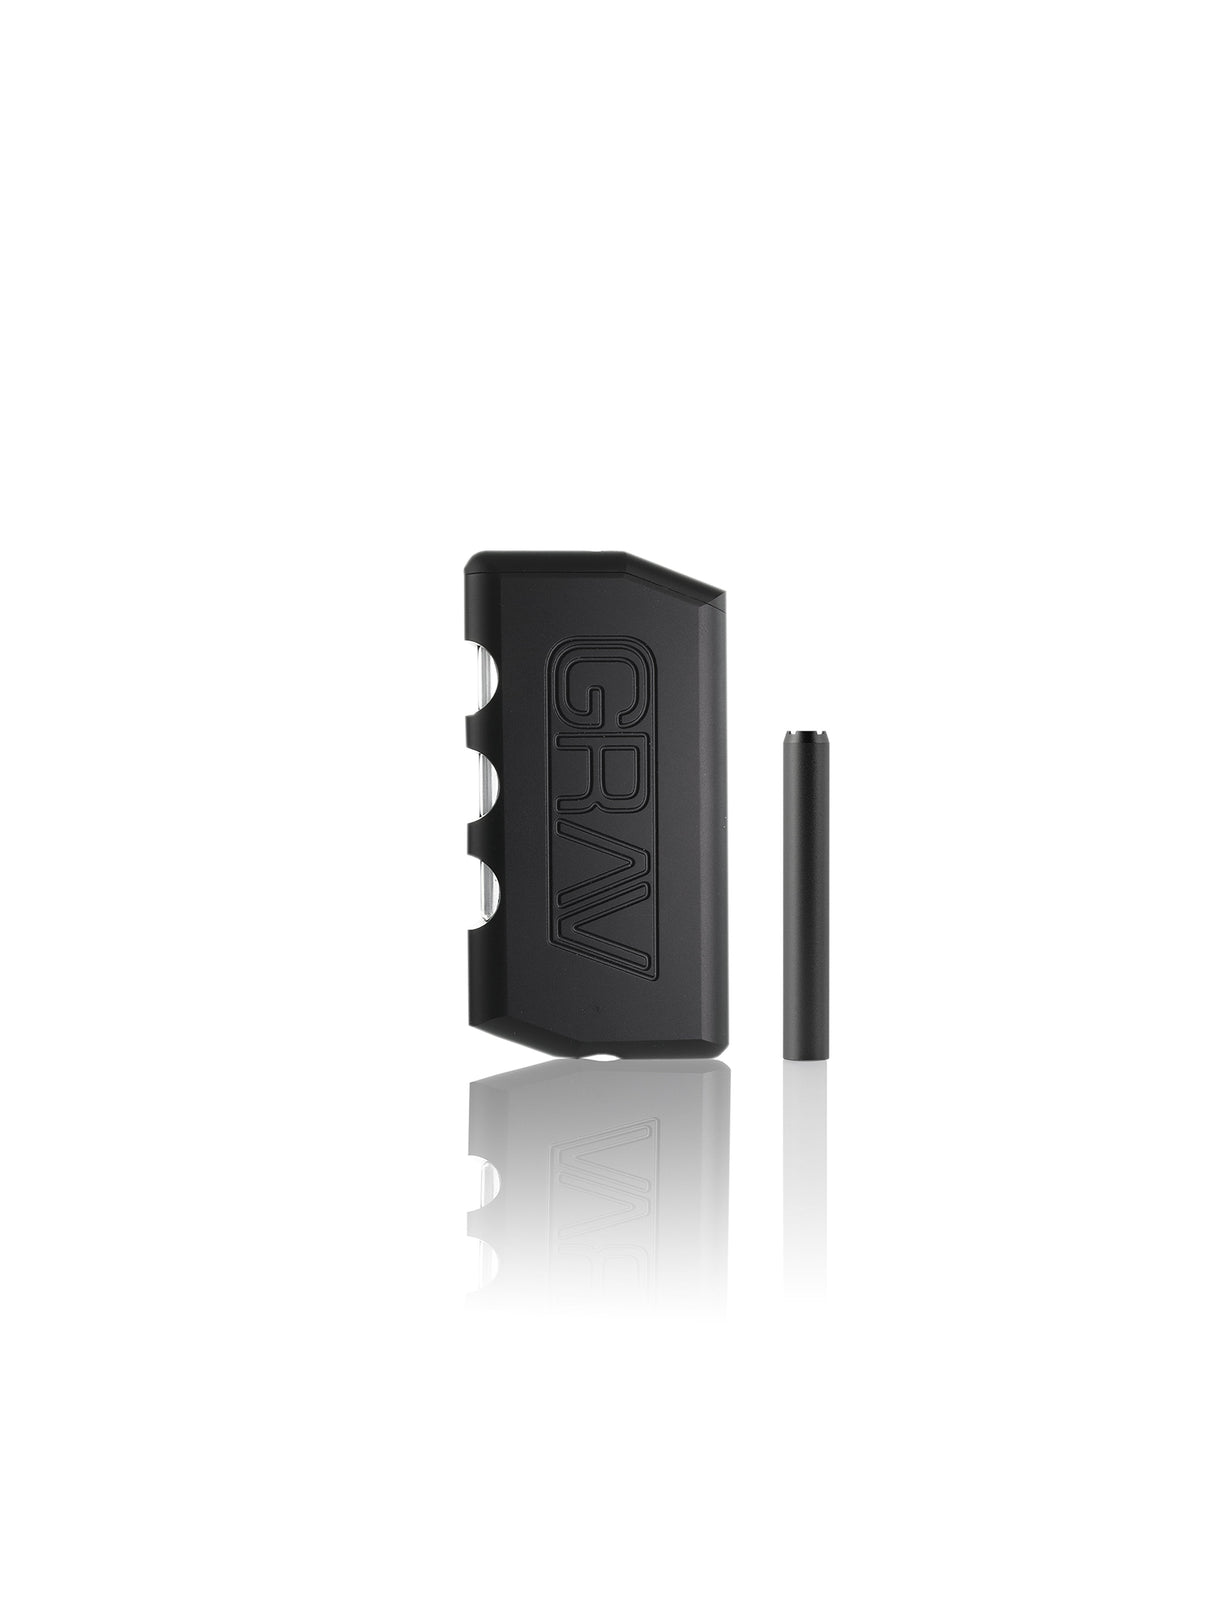 GRAV Dugout in Black - Compact 3.5" Aluminum Hand Pipe with Storage - Front View